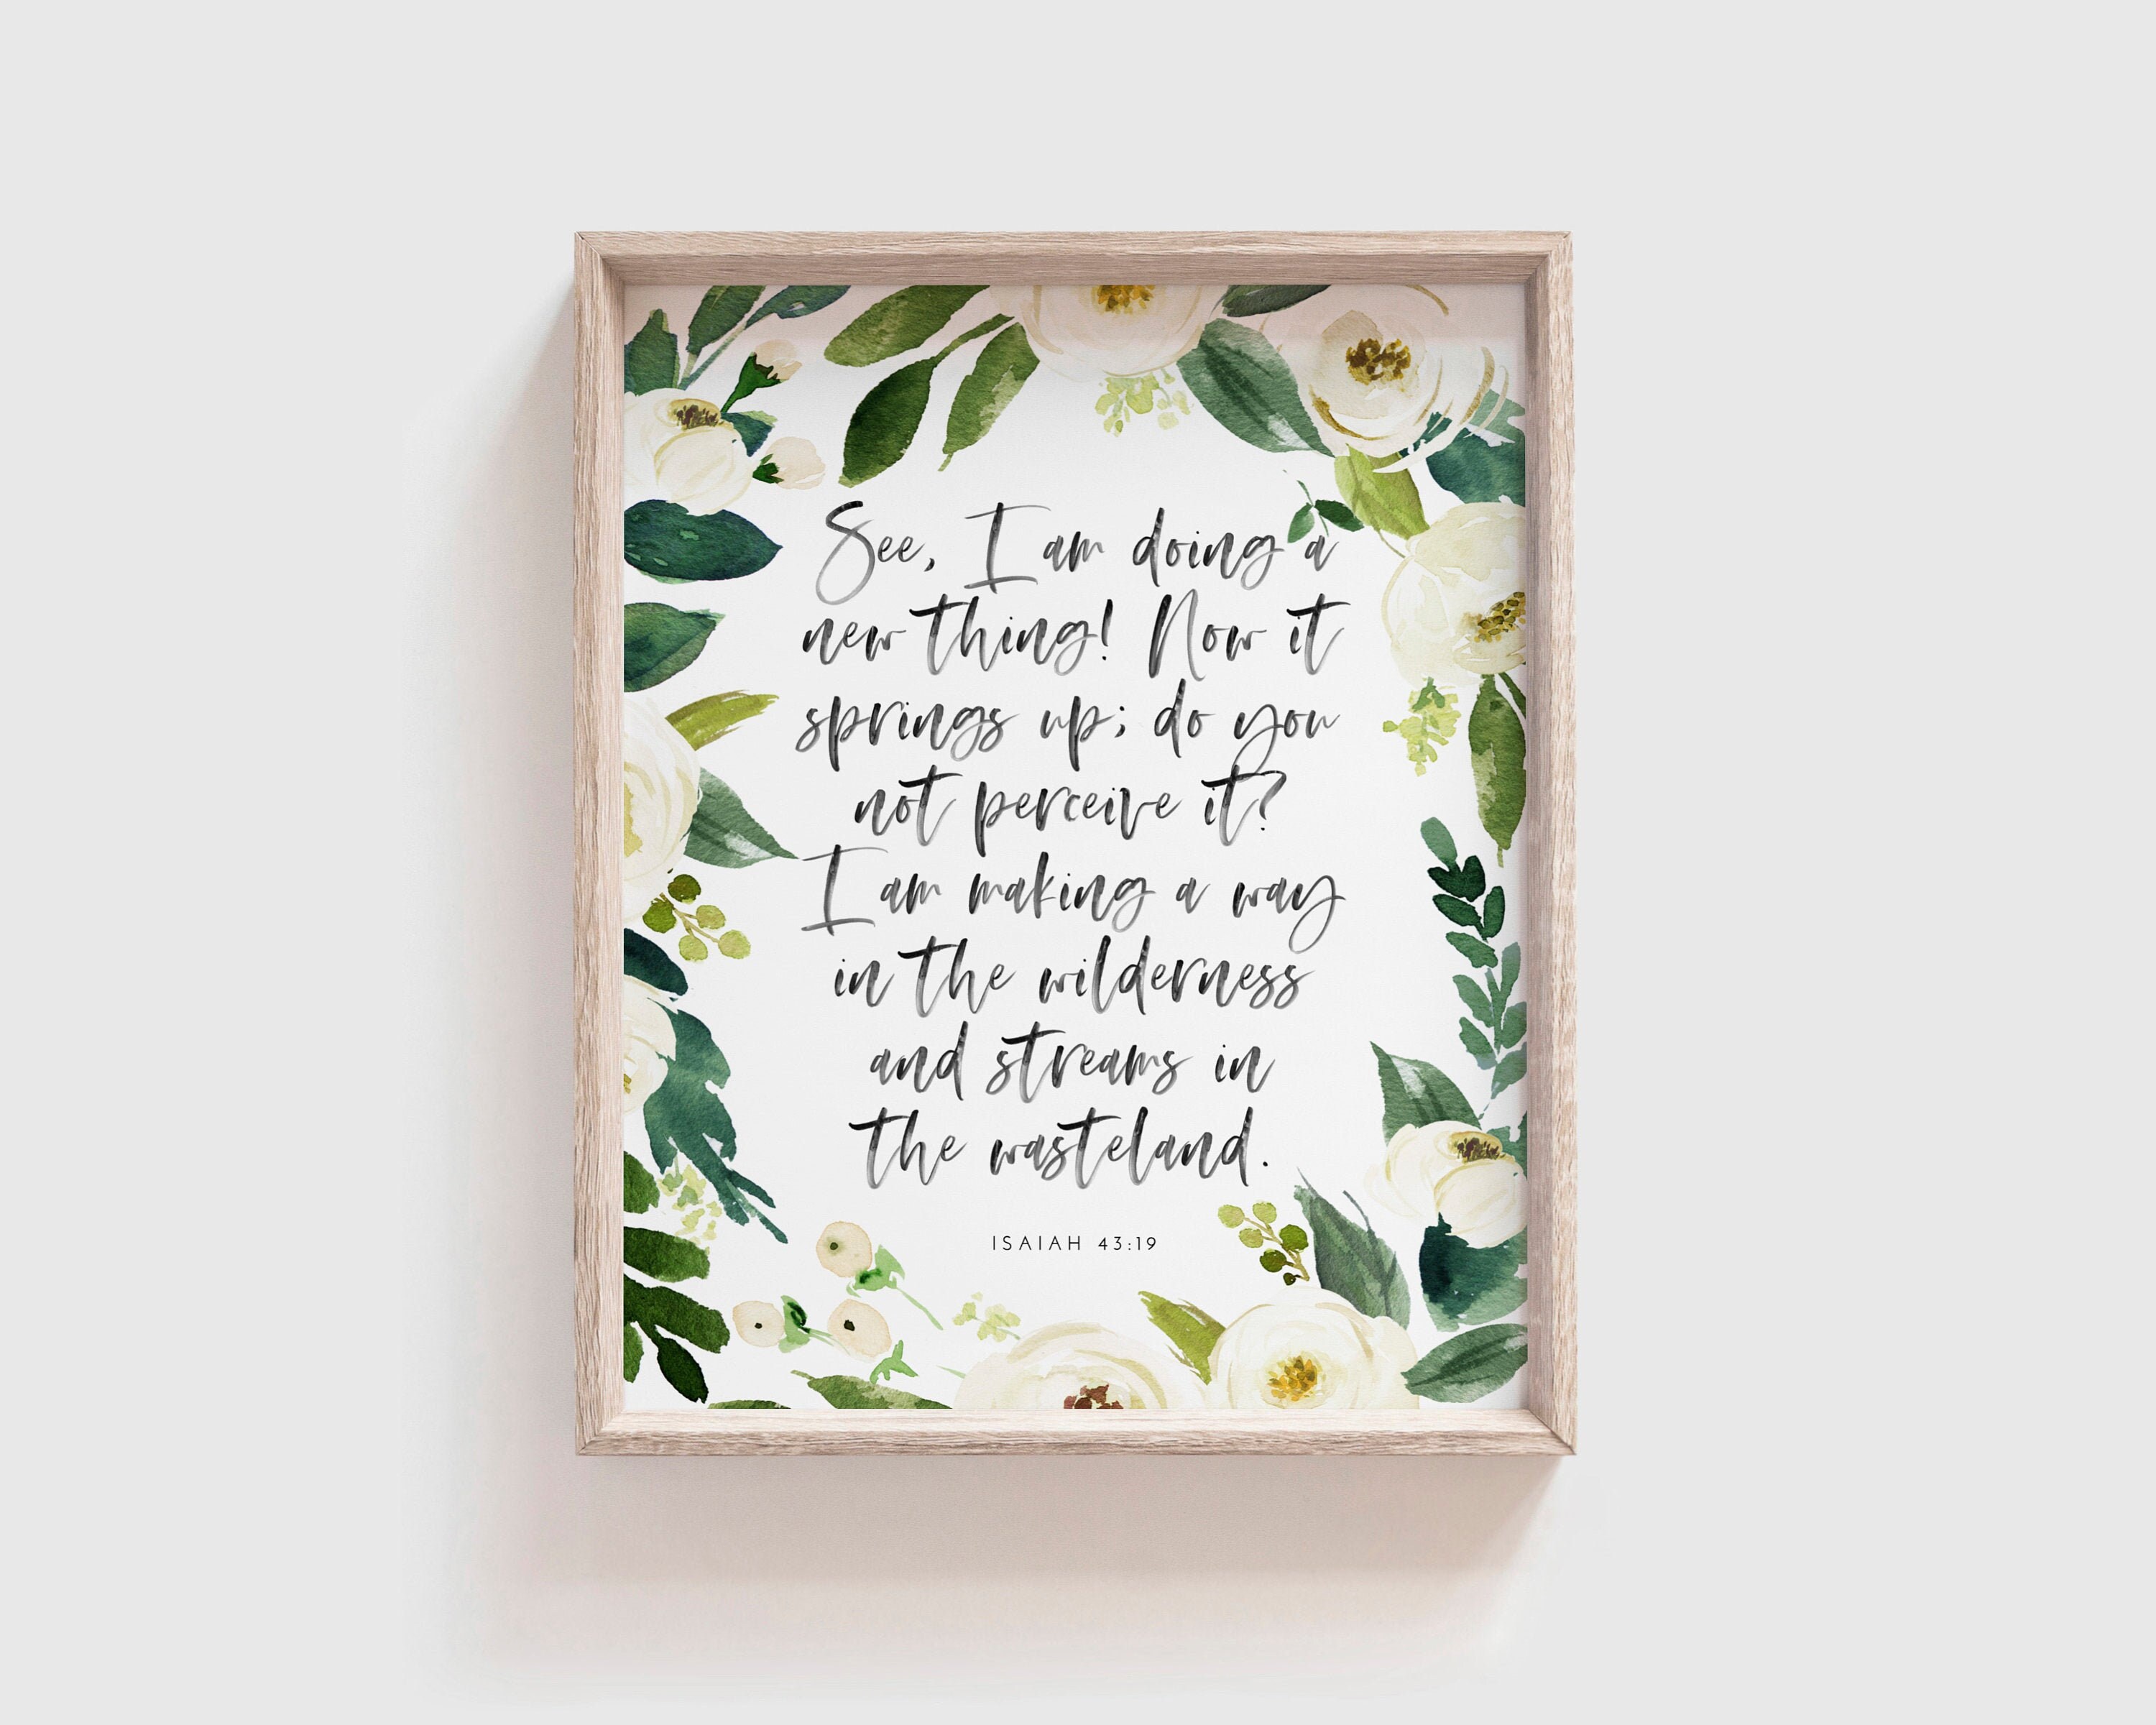 I am doing a new thing Hand-lettered Print 5x7 Isaiah 43:19| Scripture Digital 8x10